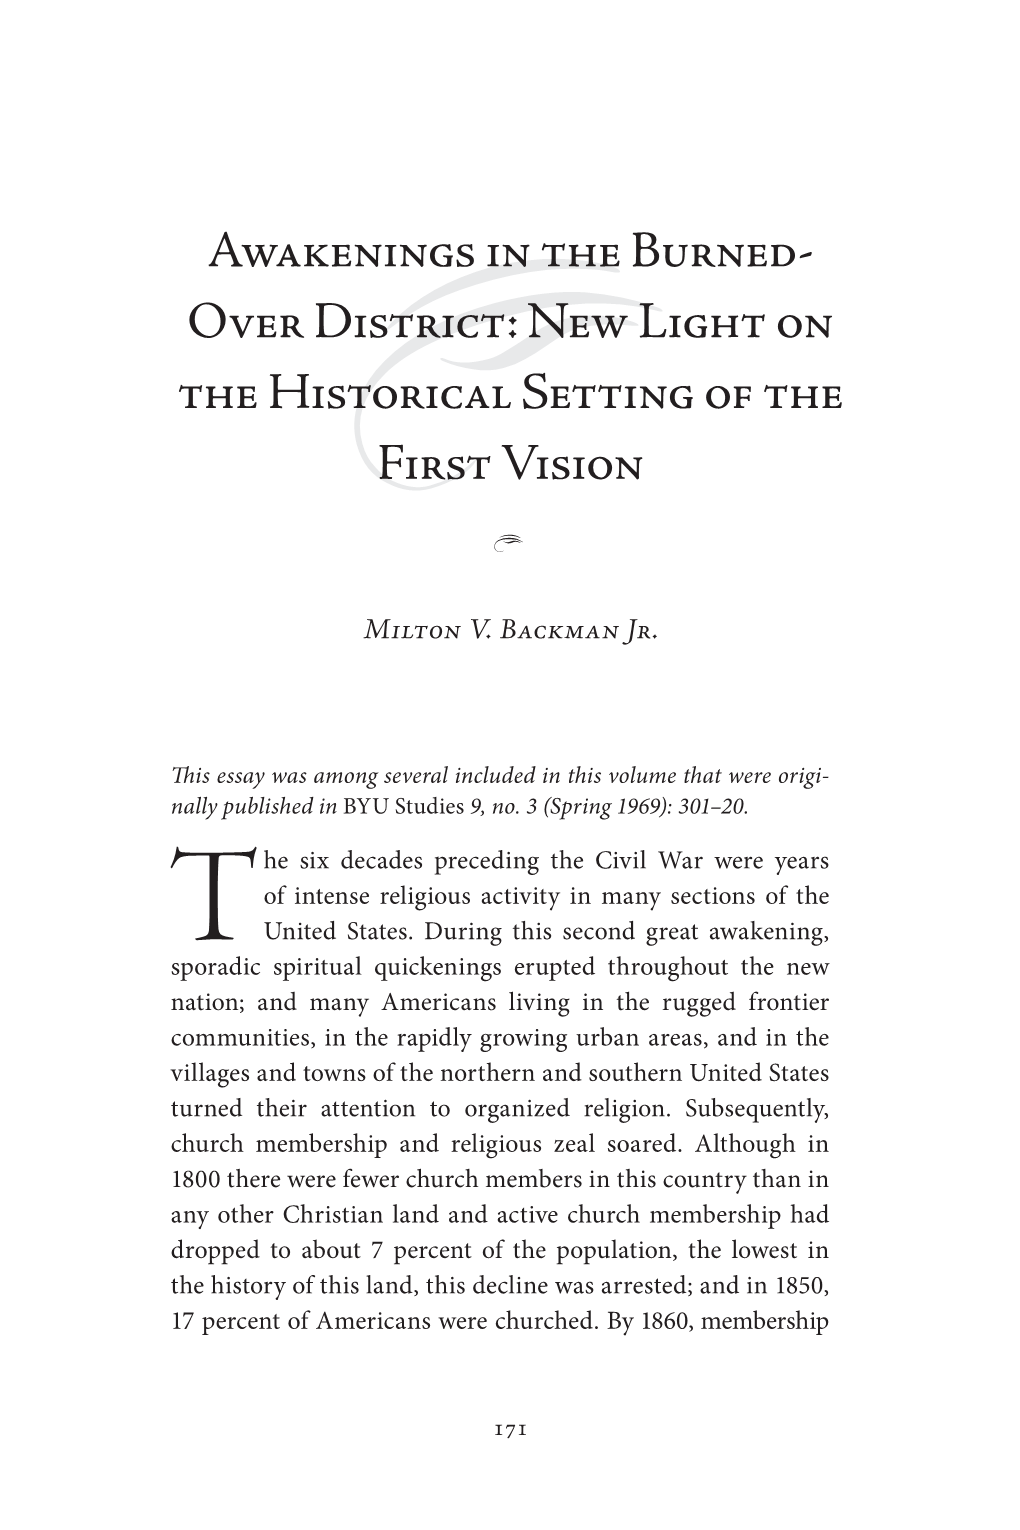 Over District: New Light on the Historical Setting of the First Vision